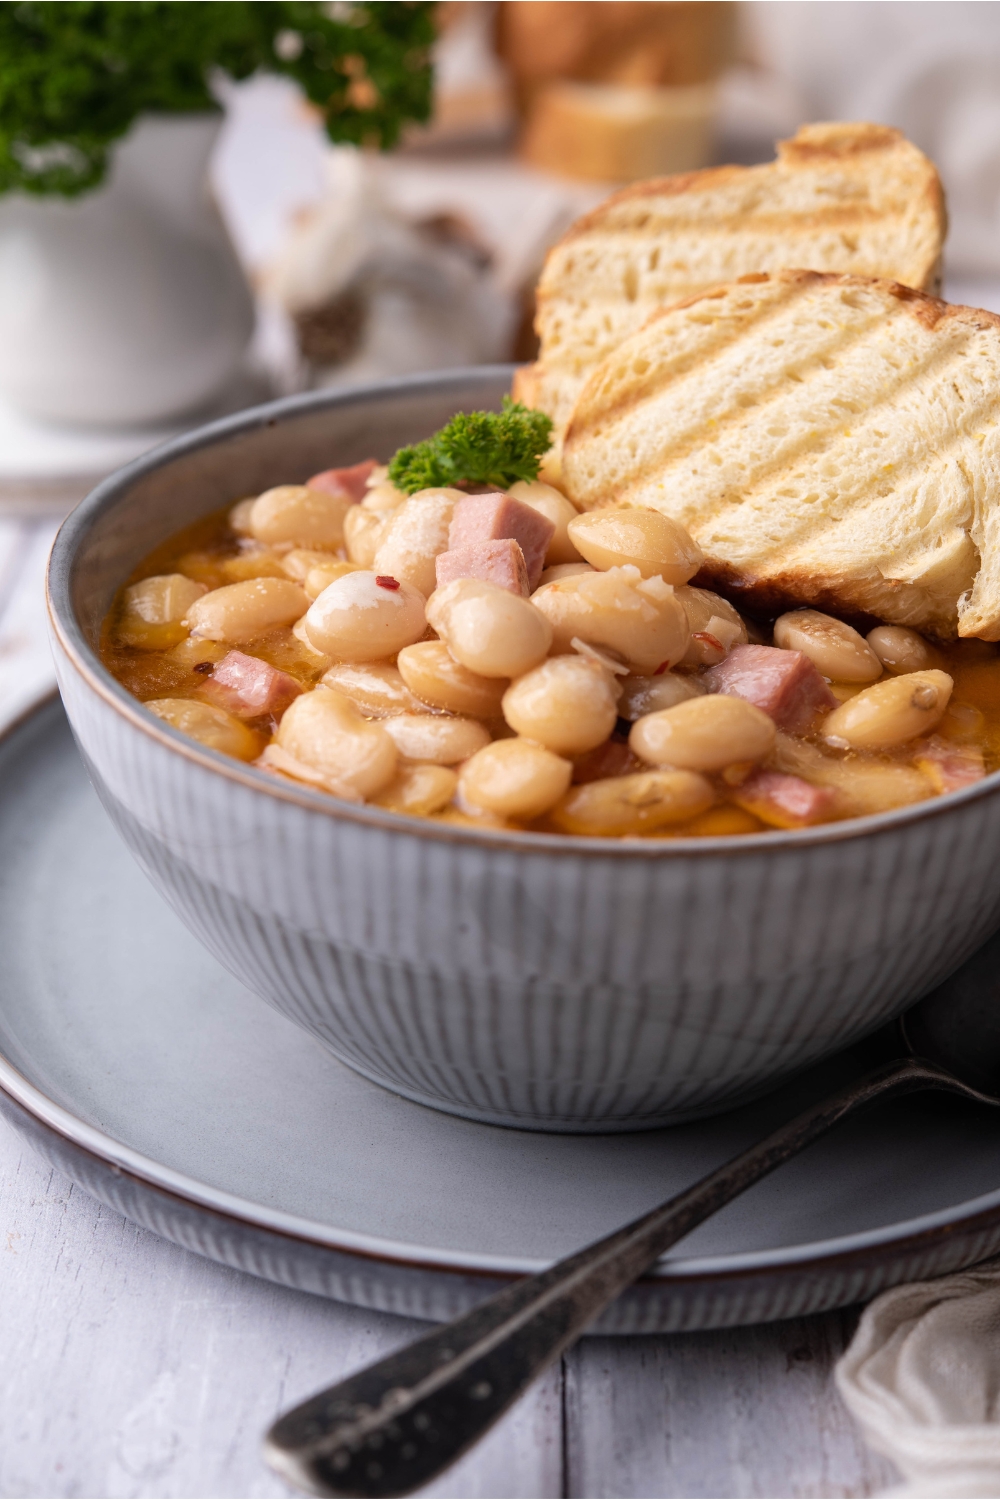 Butter beans with diced ham and two slices of toast on a blue bowl on top of a blue plate, with a spoon on the plate.